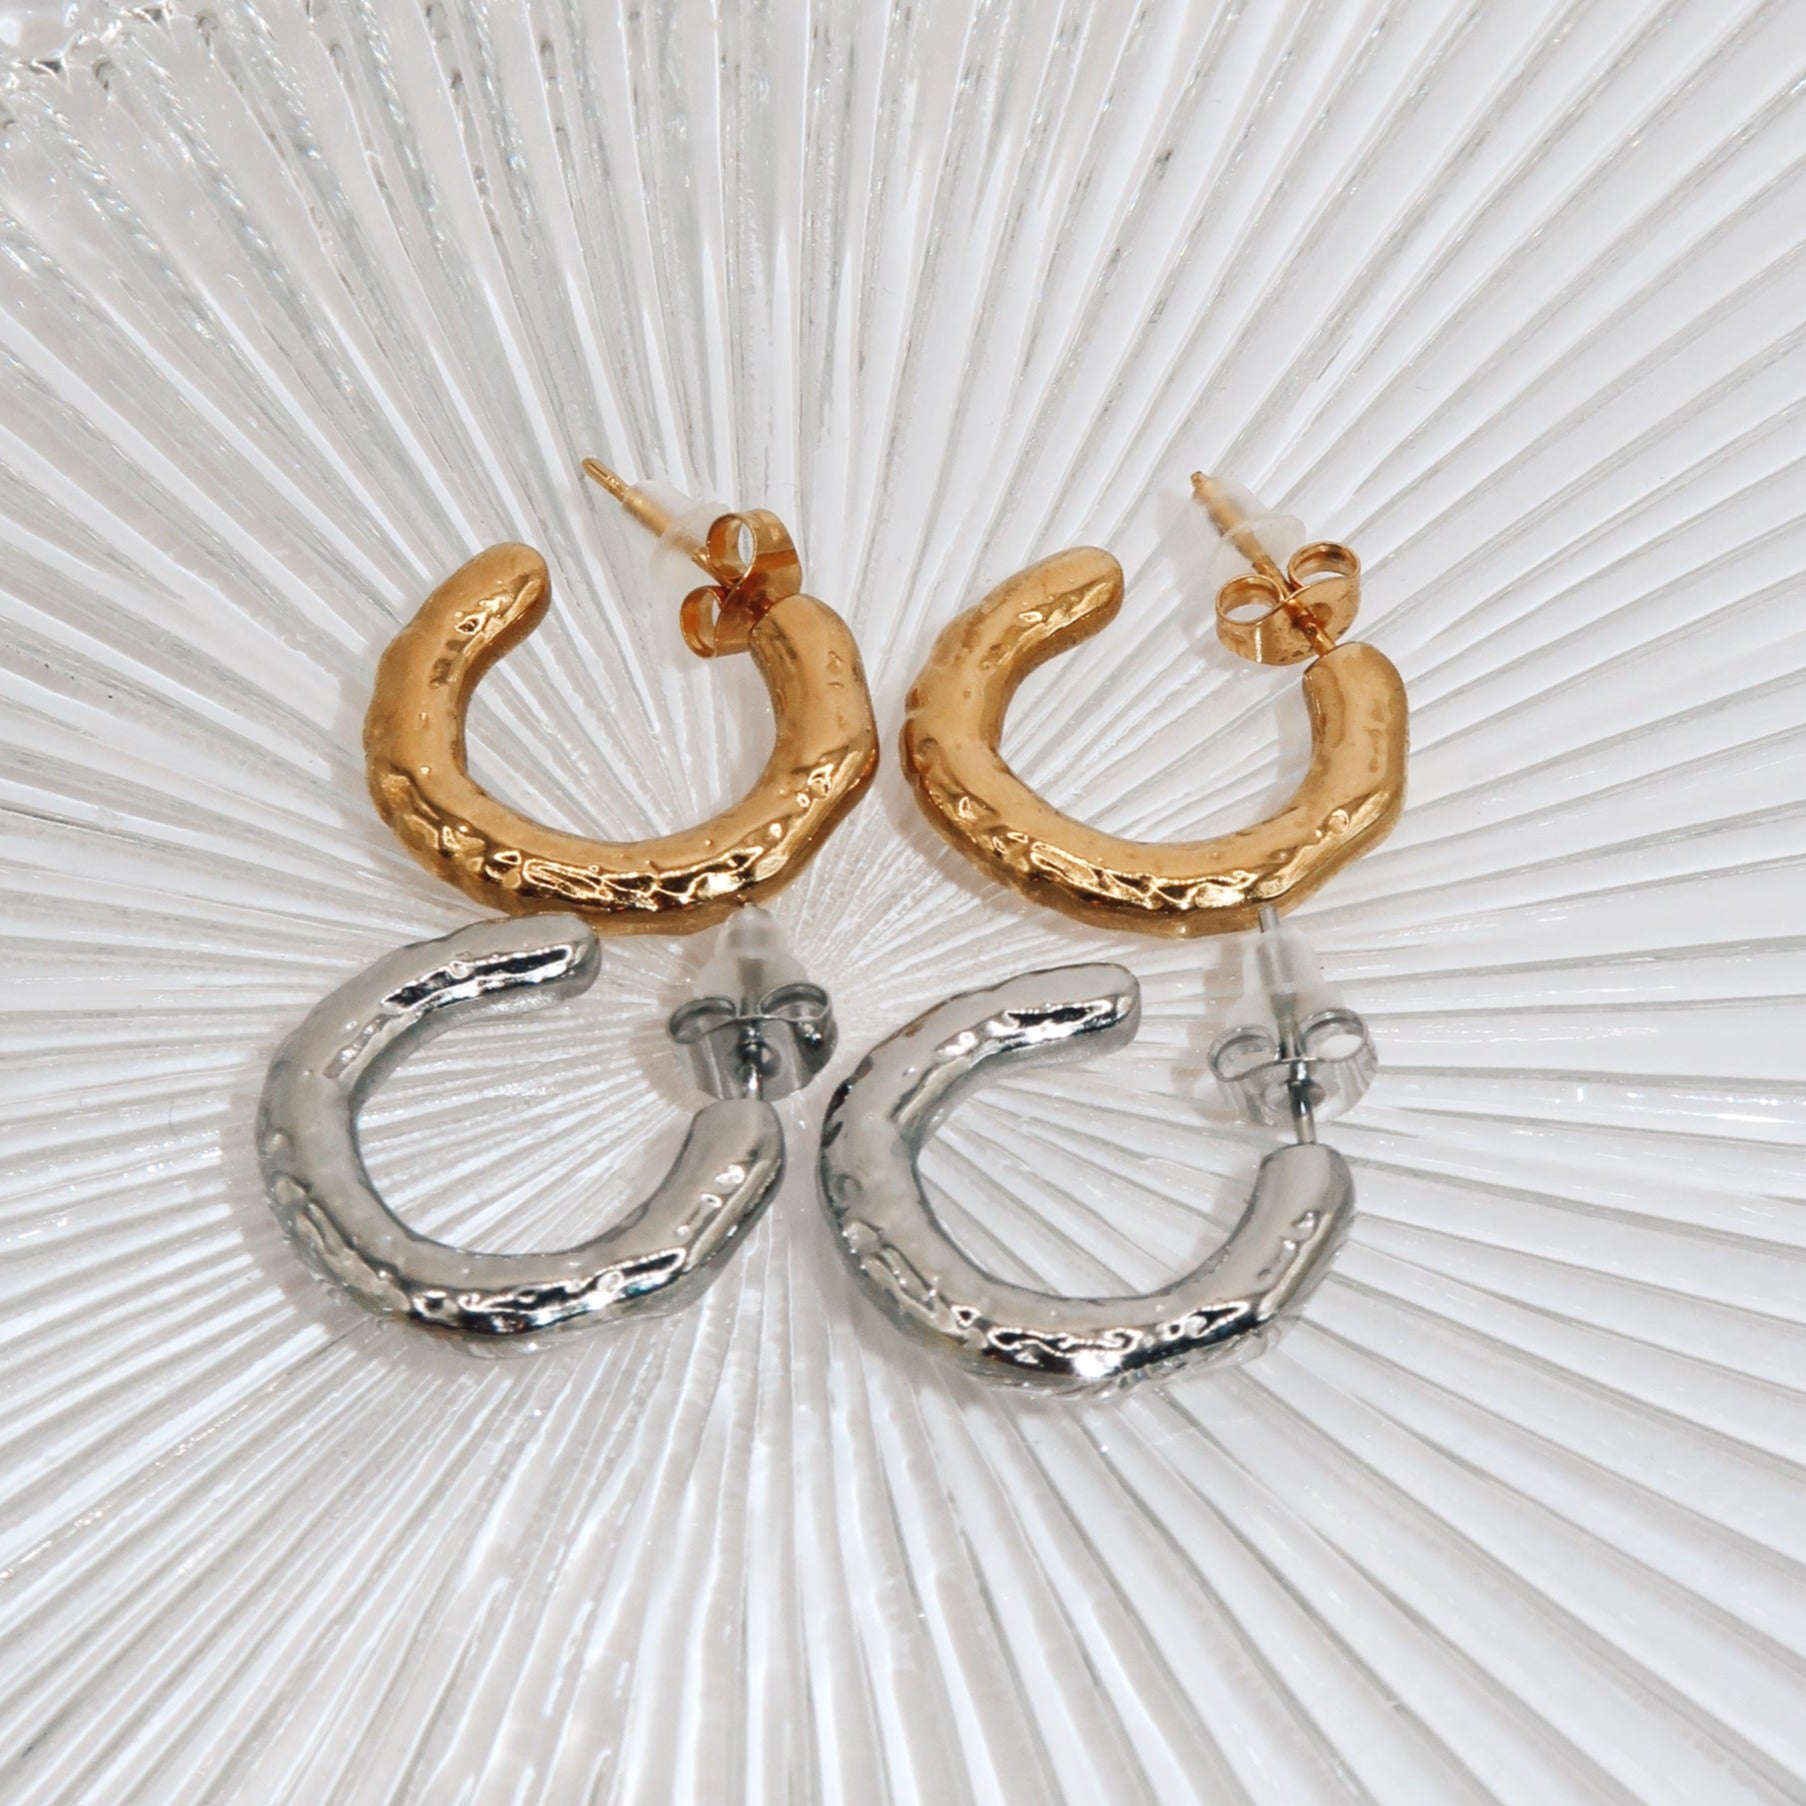 ZAINA - 18K PVD Gold Plated Small Hammered Hoop Earrings - Mixed Metals